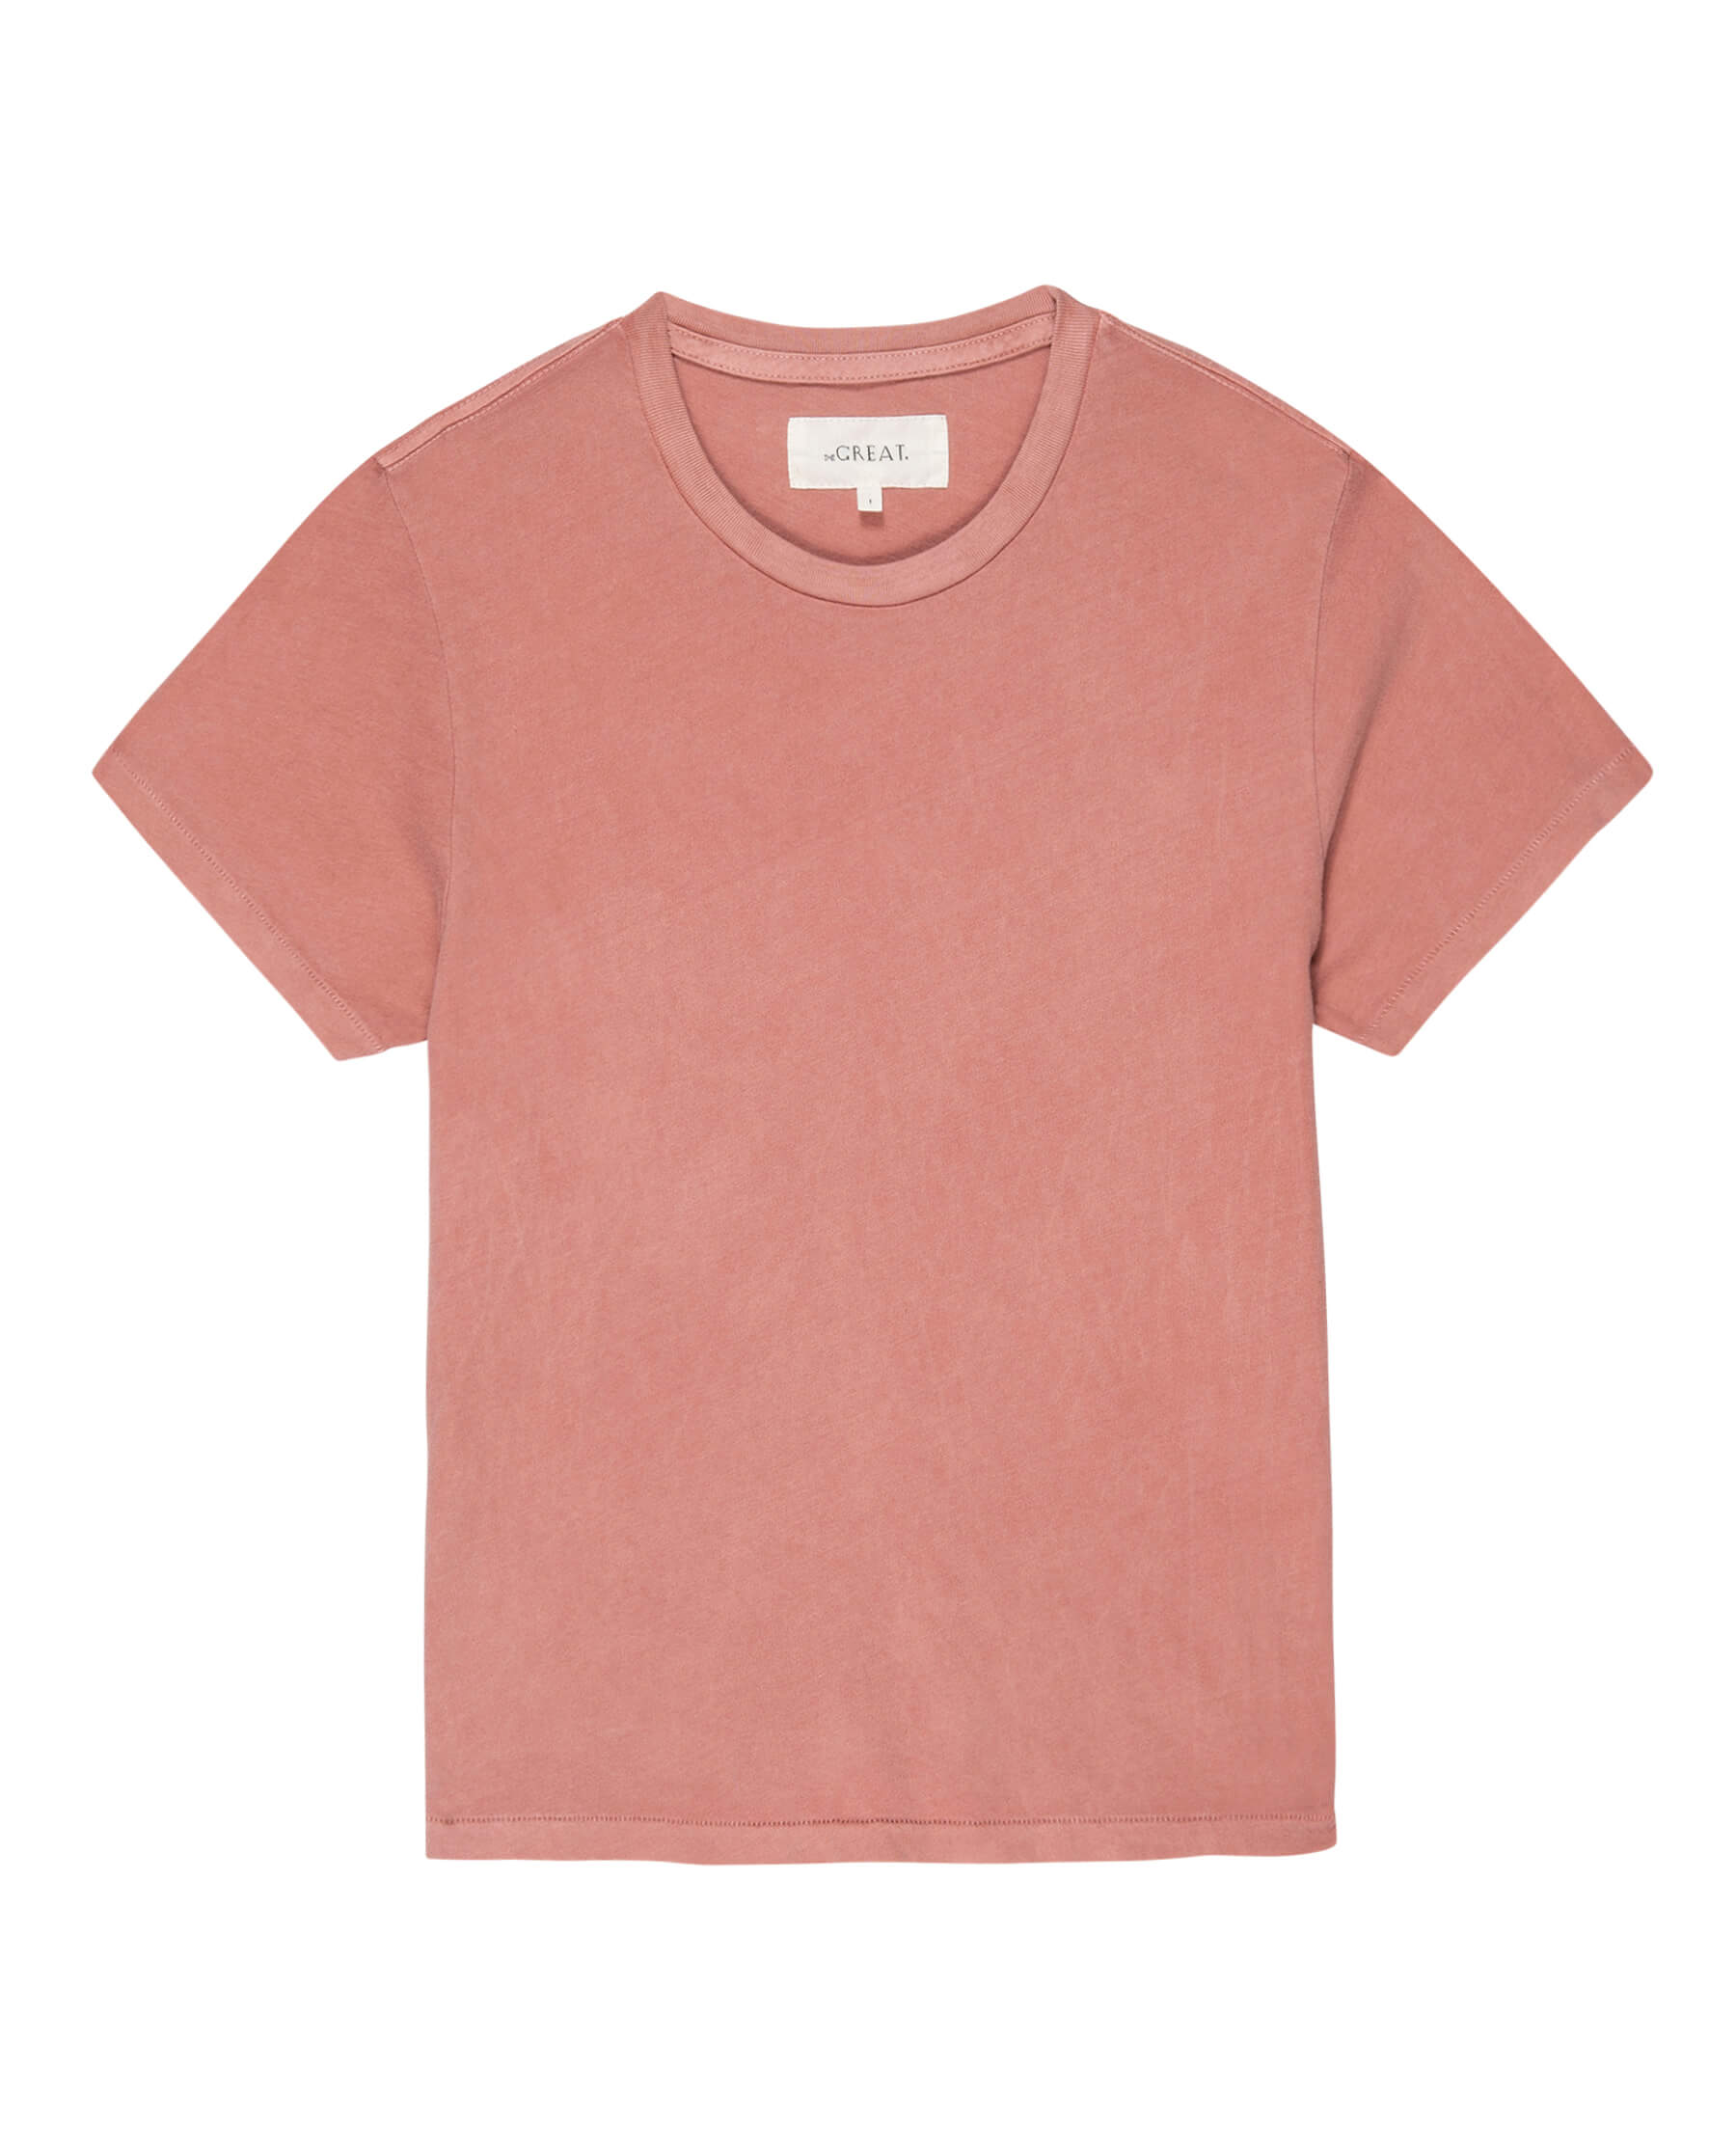 The Little Tee. Solid -- Rose